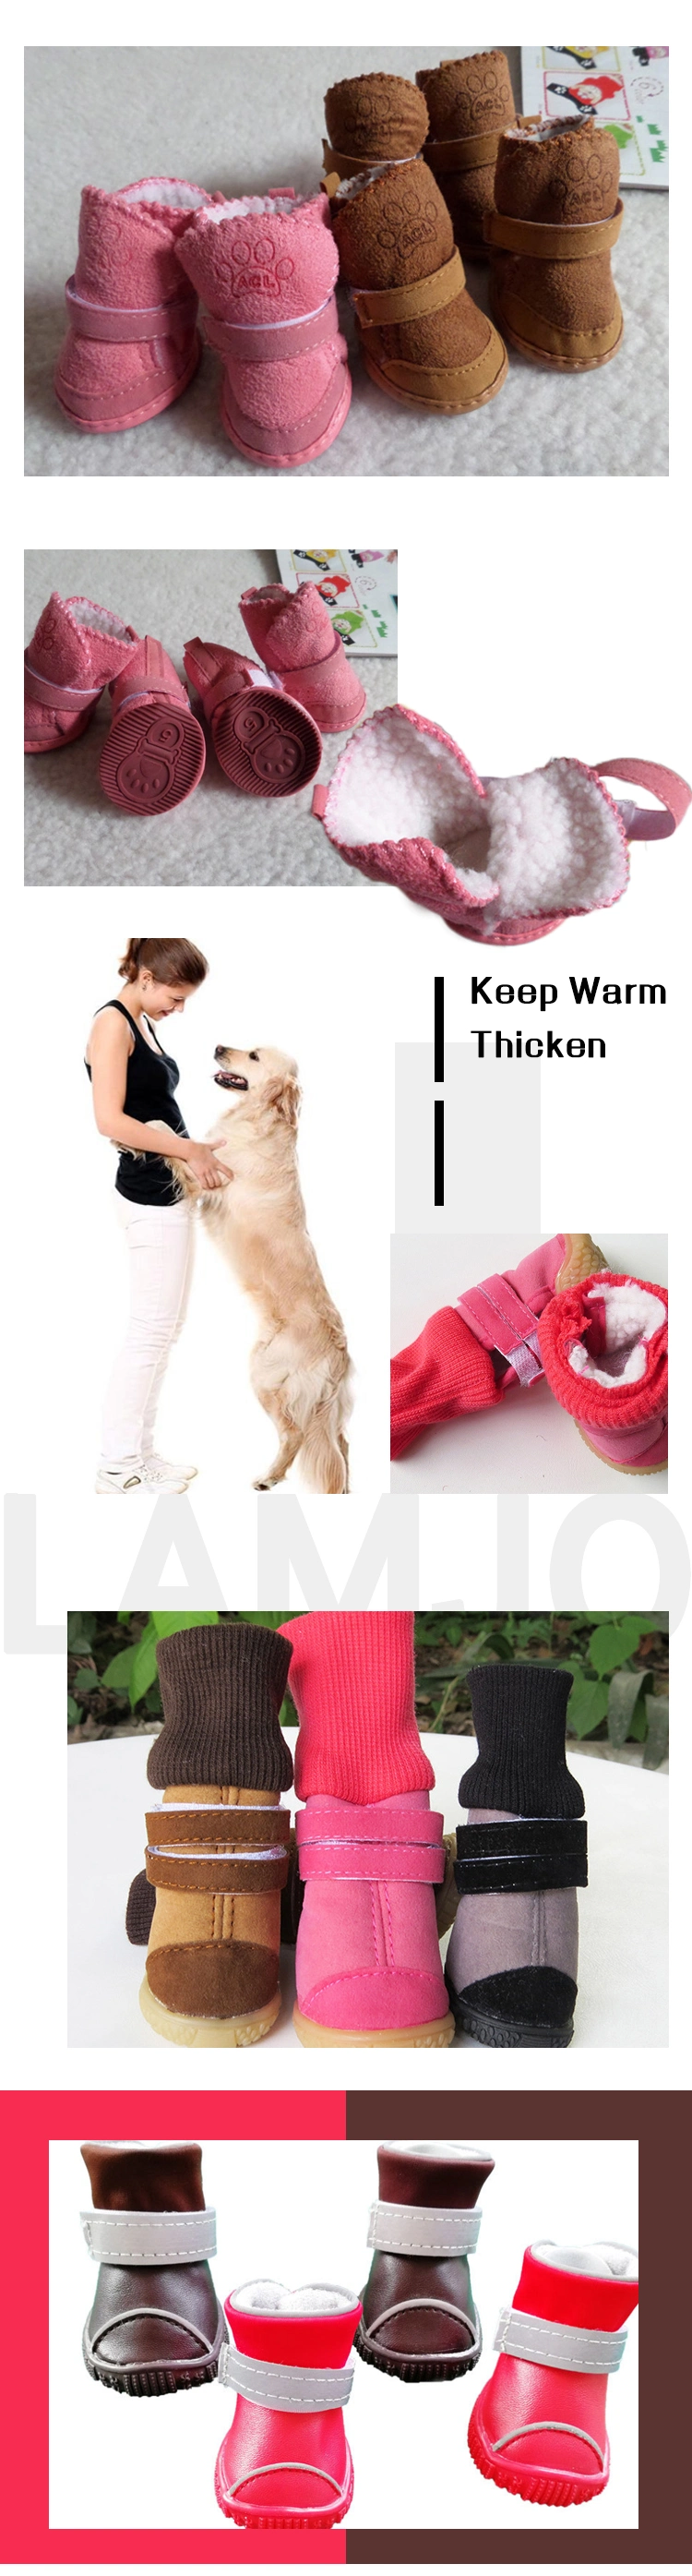 Hot Selling Wholesale Cute Animal House Winter Disposable Sport Waterproof Pet Dog Shoes